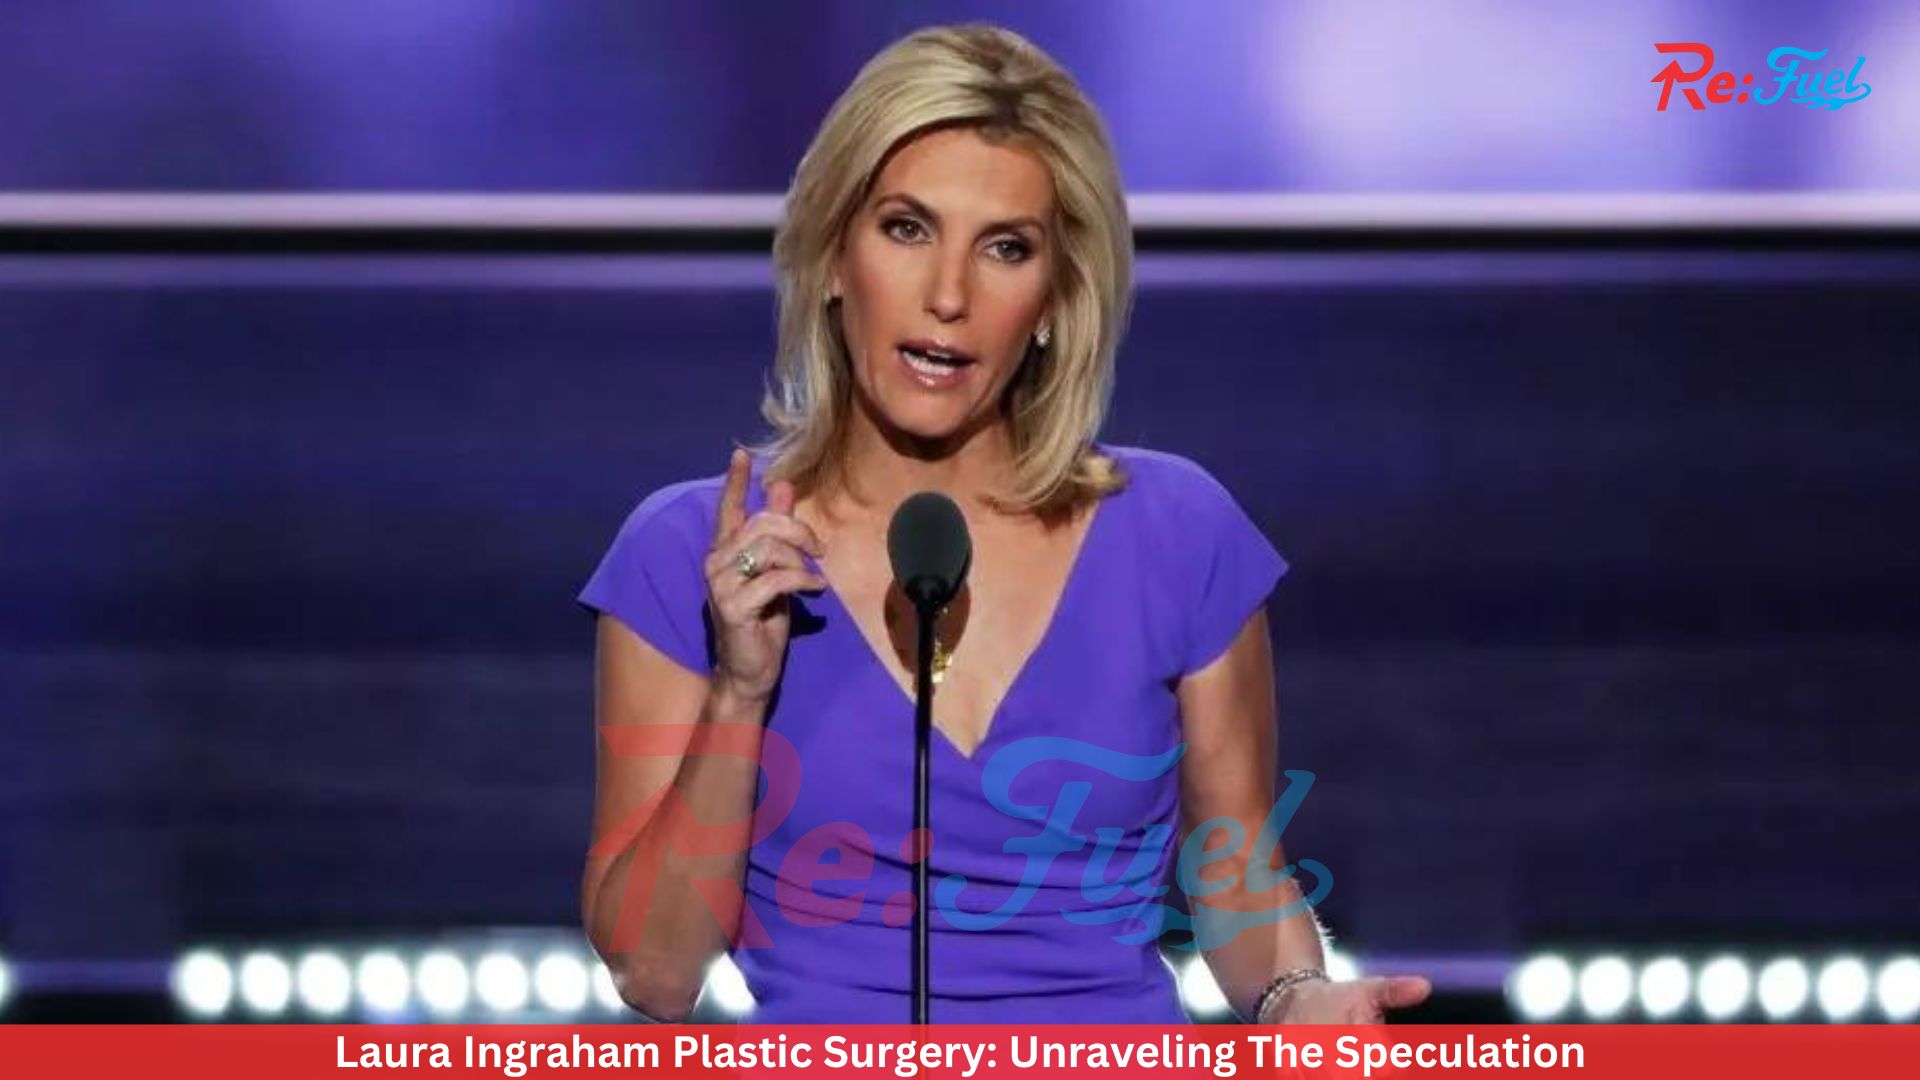 Laura Ingraham Plastic Surgery: Unraveling The Speculation